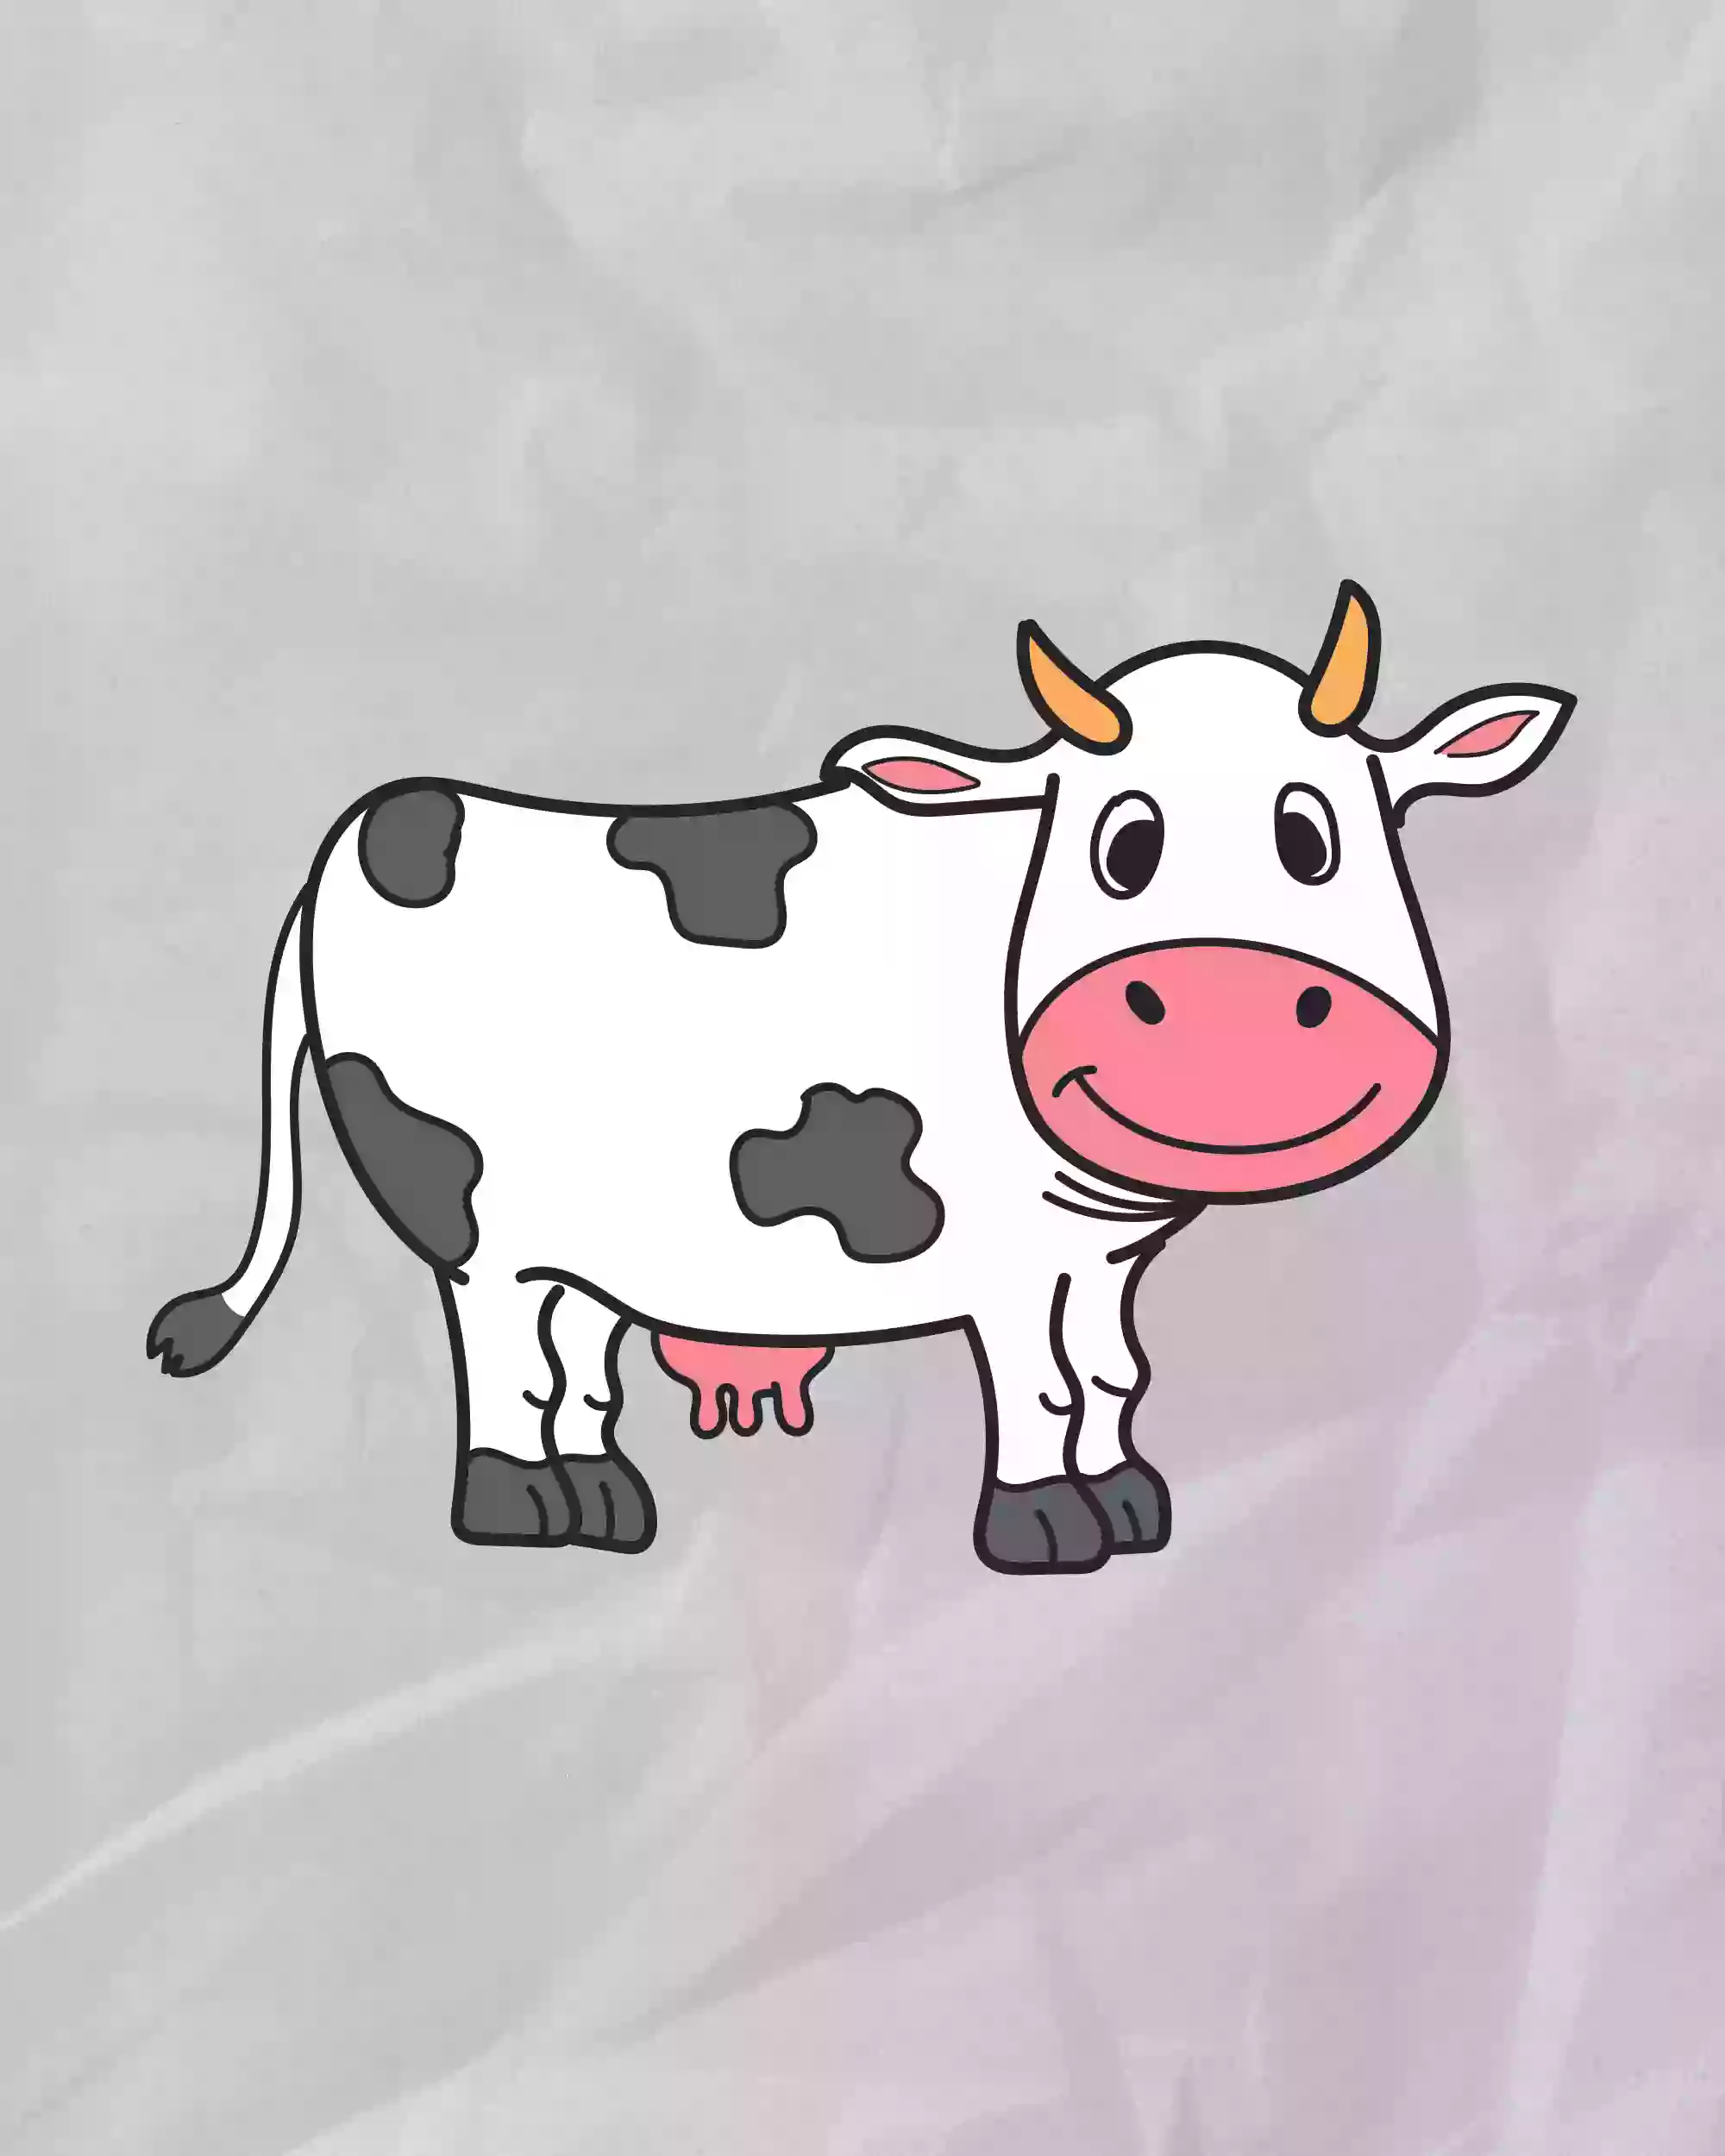 How to draw a Cow face step by step  Cow face sketch  Cow drawing cartoon   Cow drawing Cow cartoon drawing Cow cartoon images